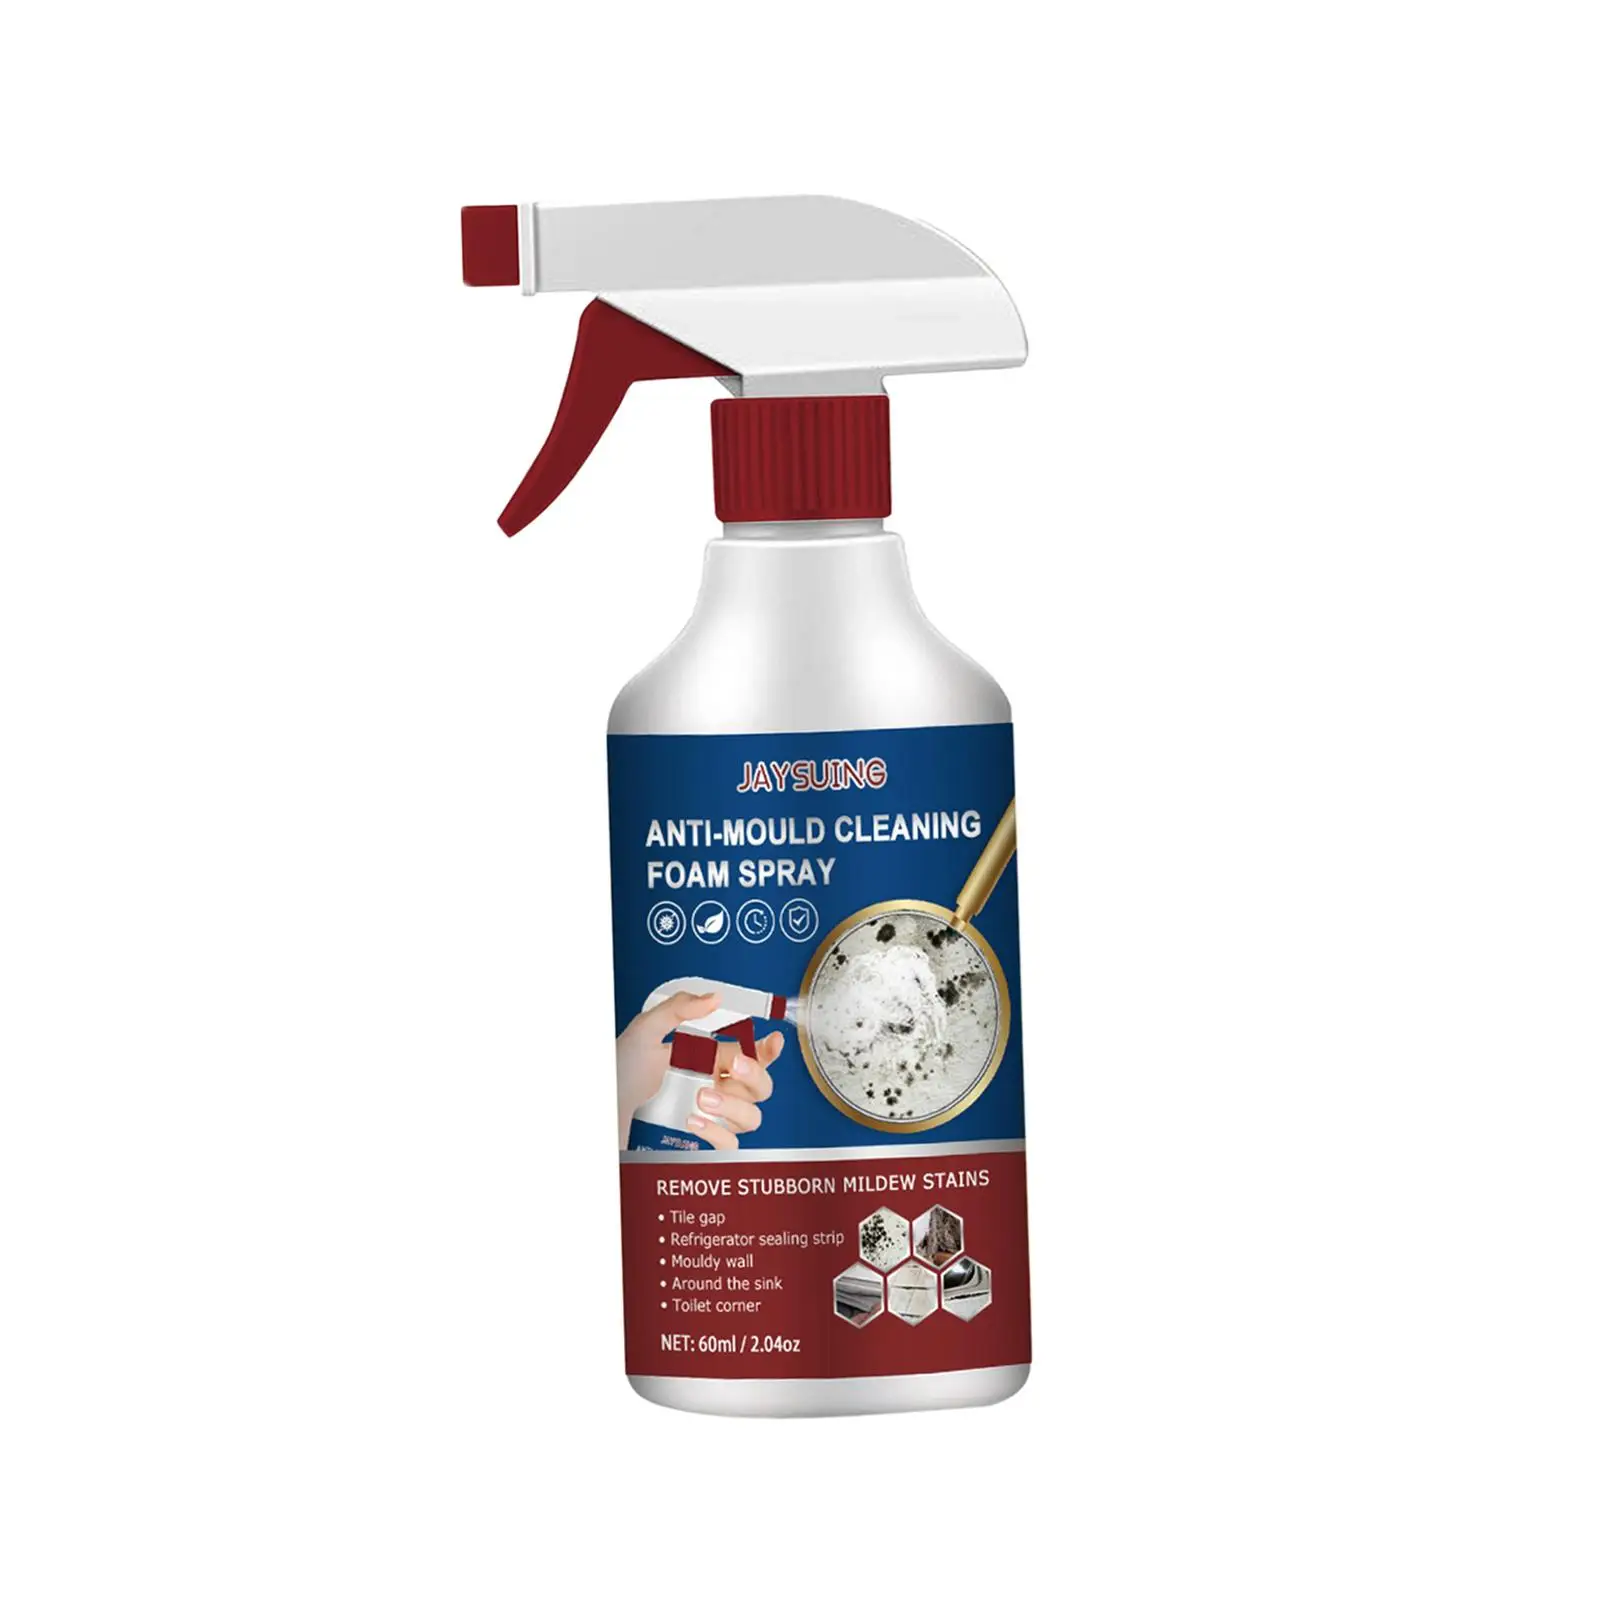 

Home Applicance Order Remover Maintenance Foam Spray Cleaner for Kitchen Home Appliance